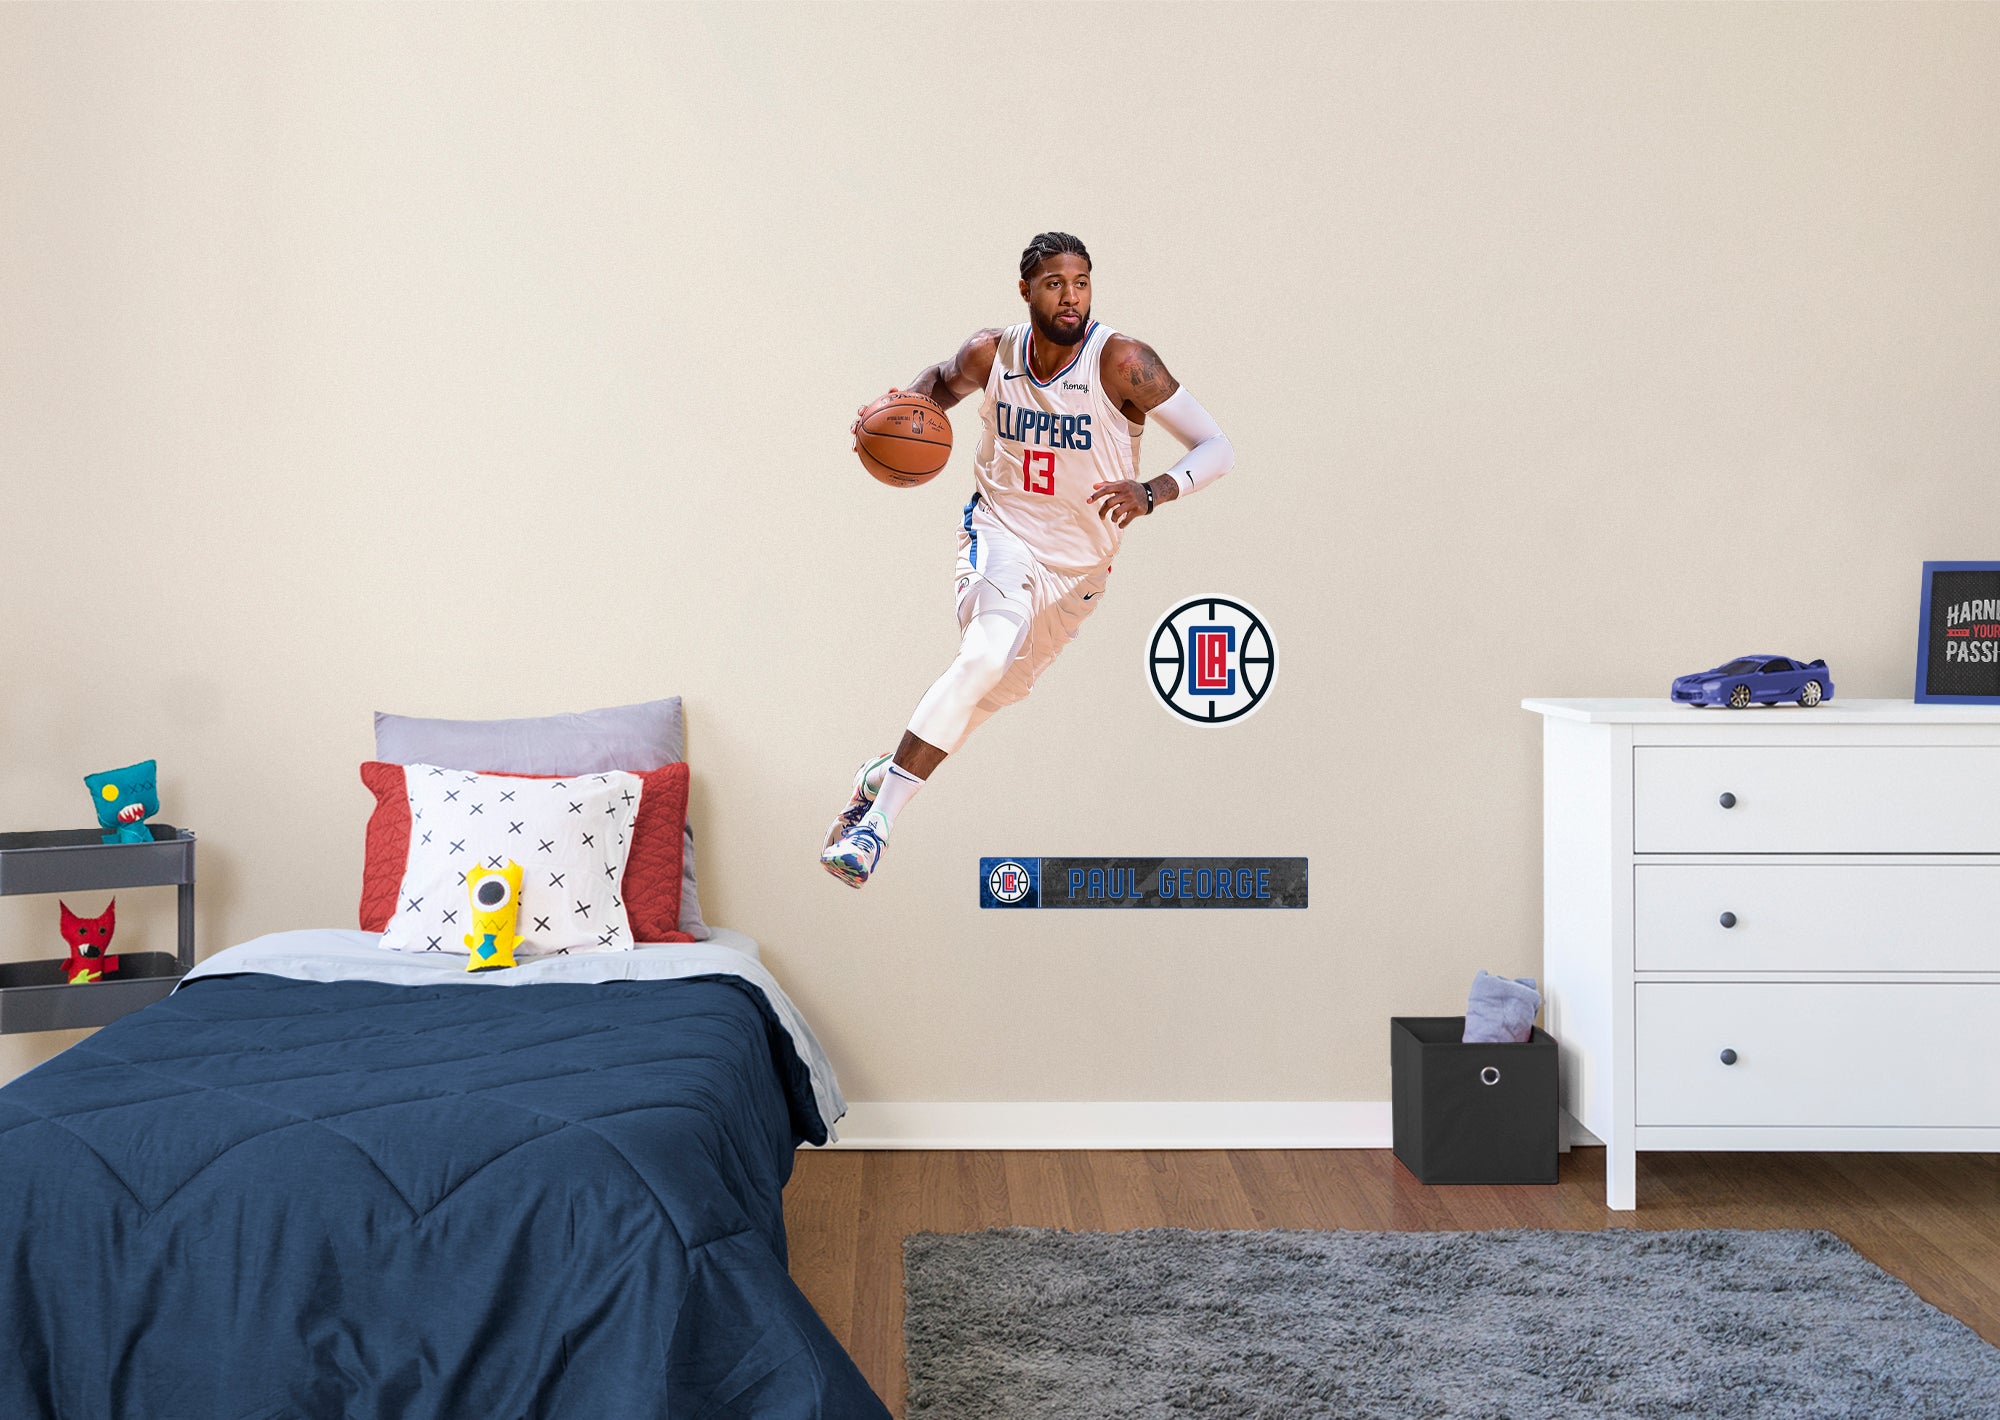 Paul George 2021 for Los Angeles Clippers - Officially Licensed NBA Removable Wall Decal Giant Athlete + 2 Decals by Fathead | V